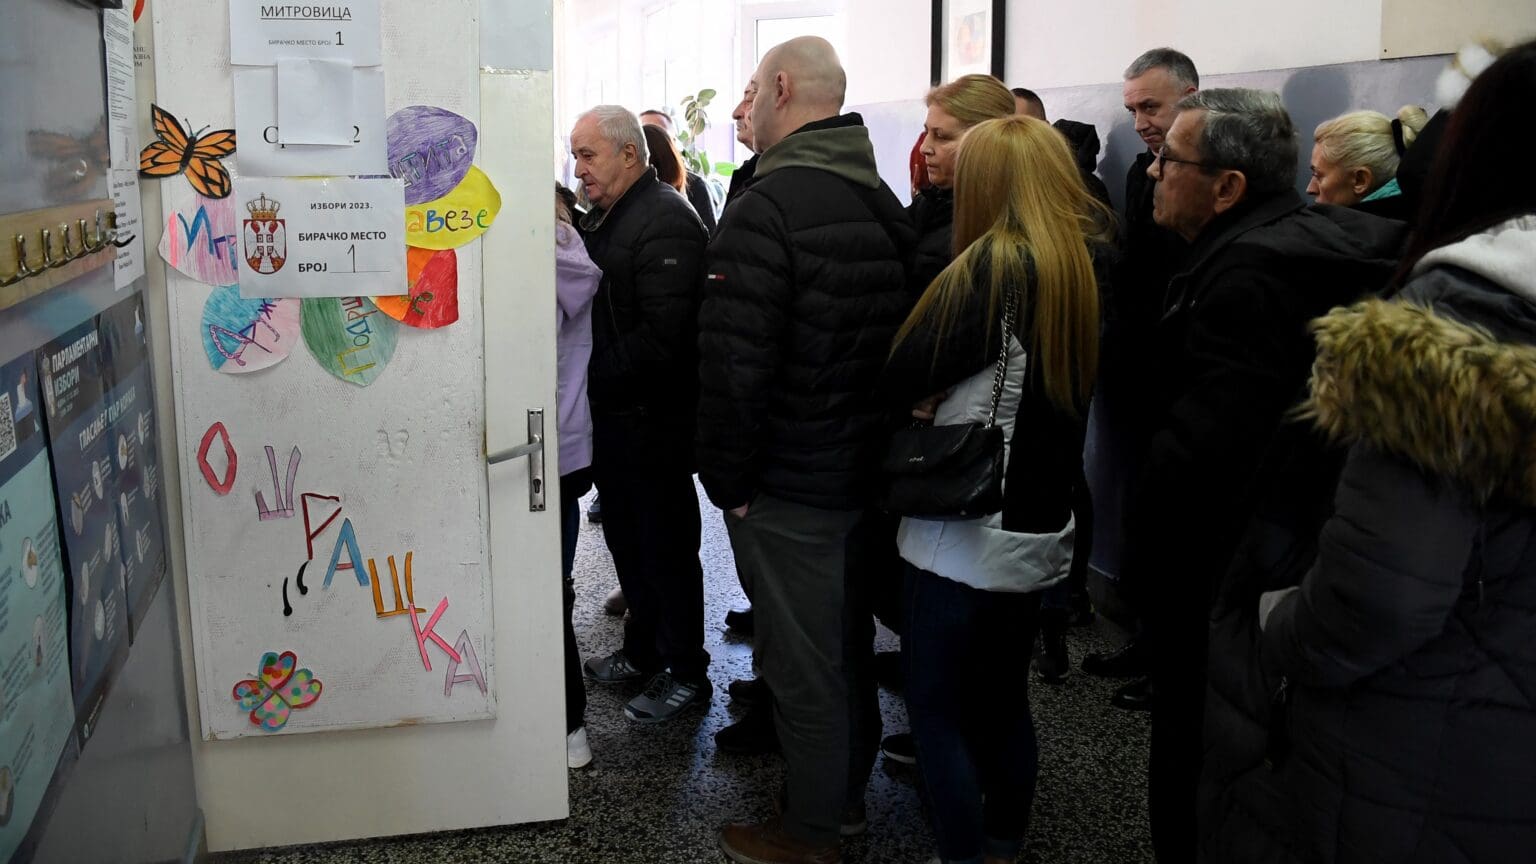 In Serbia, Elections See Continuity Rather Than Change